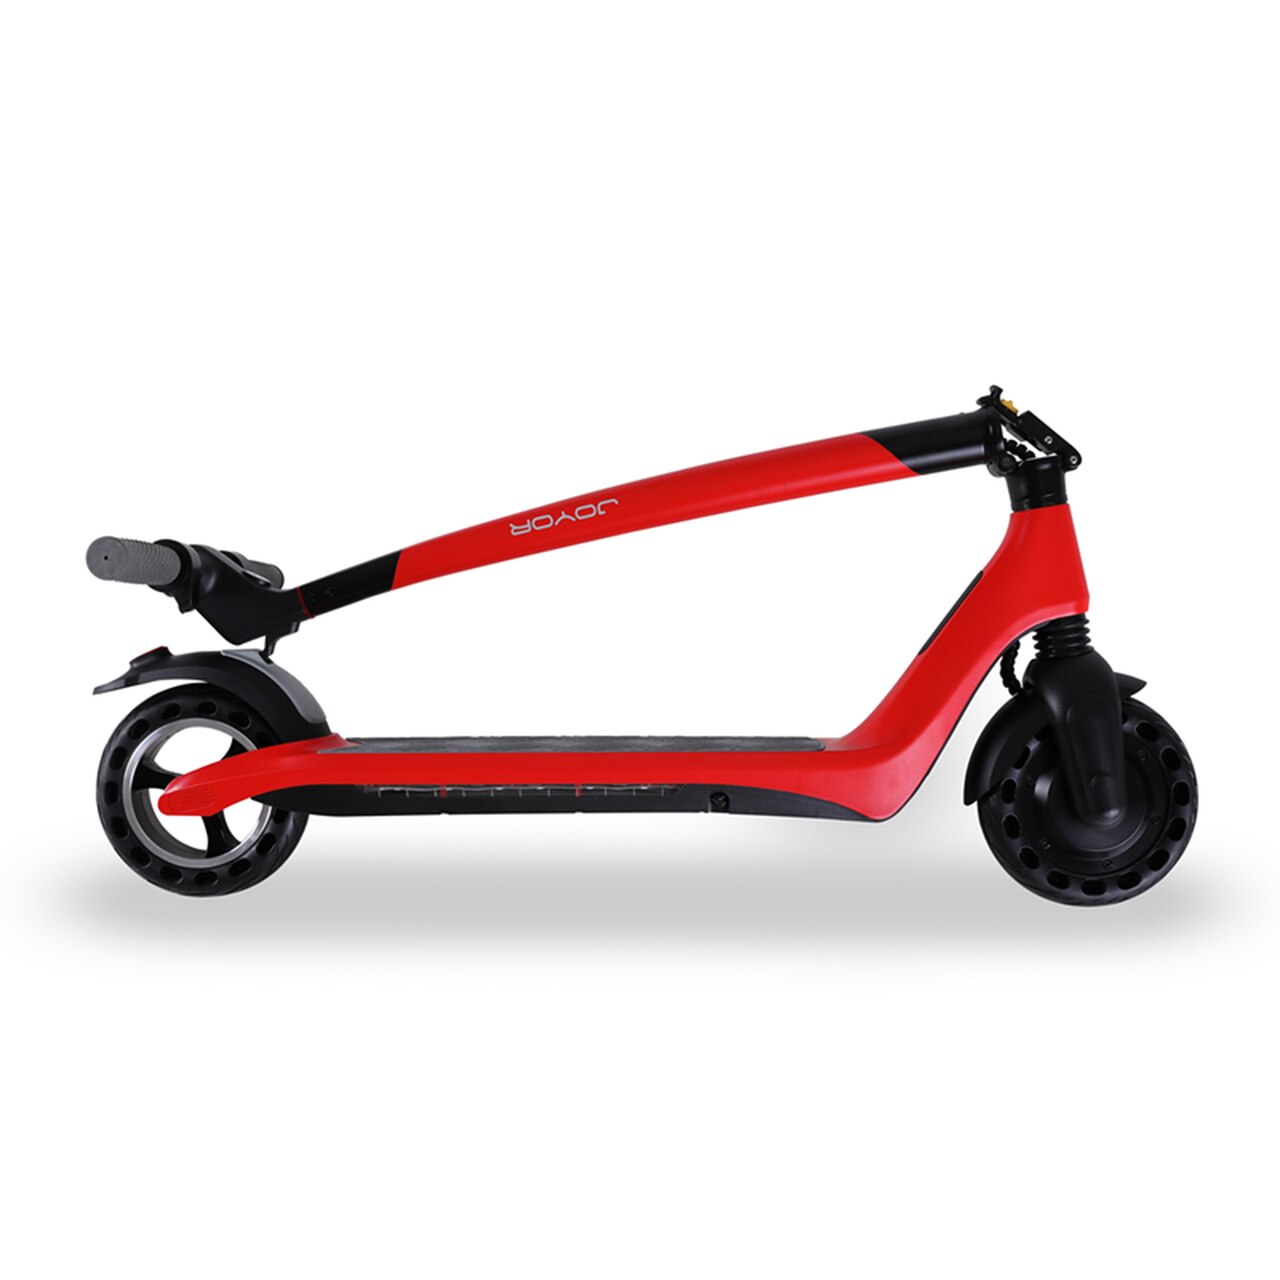 Joyor A3 Up to 21.7 Mile Range 8" Tires Electric Scooter Red New